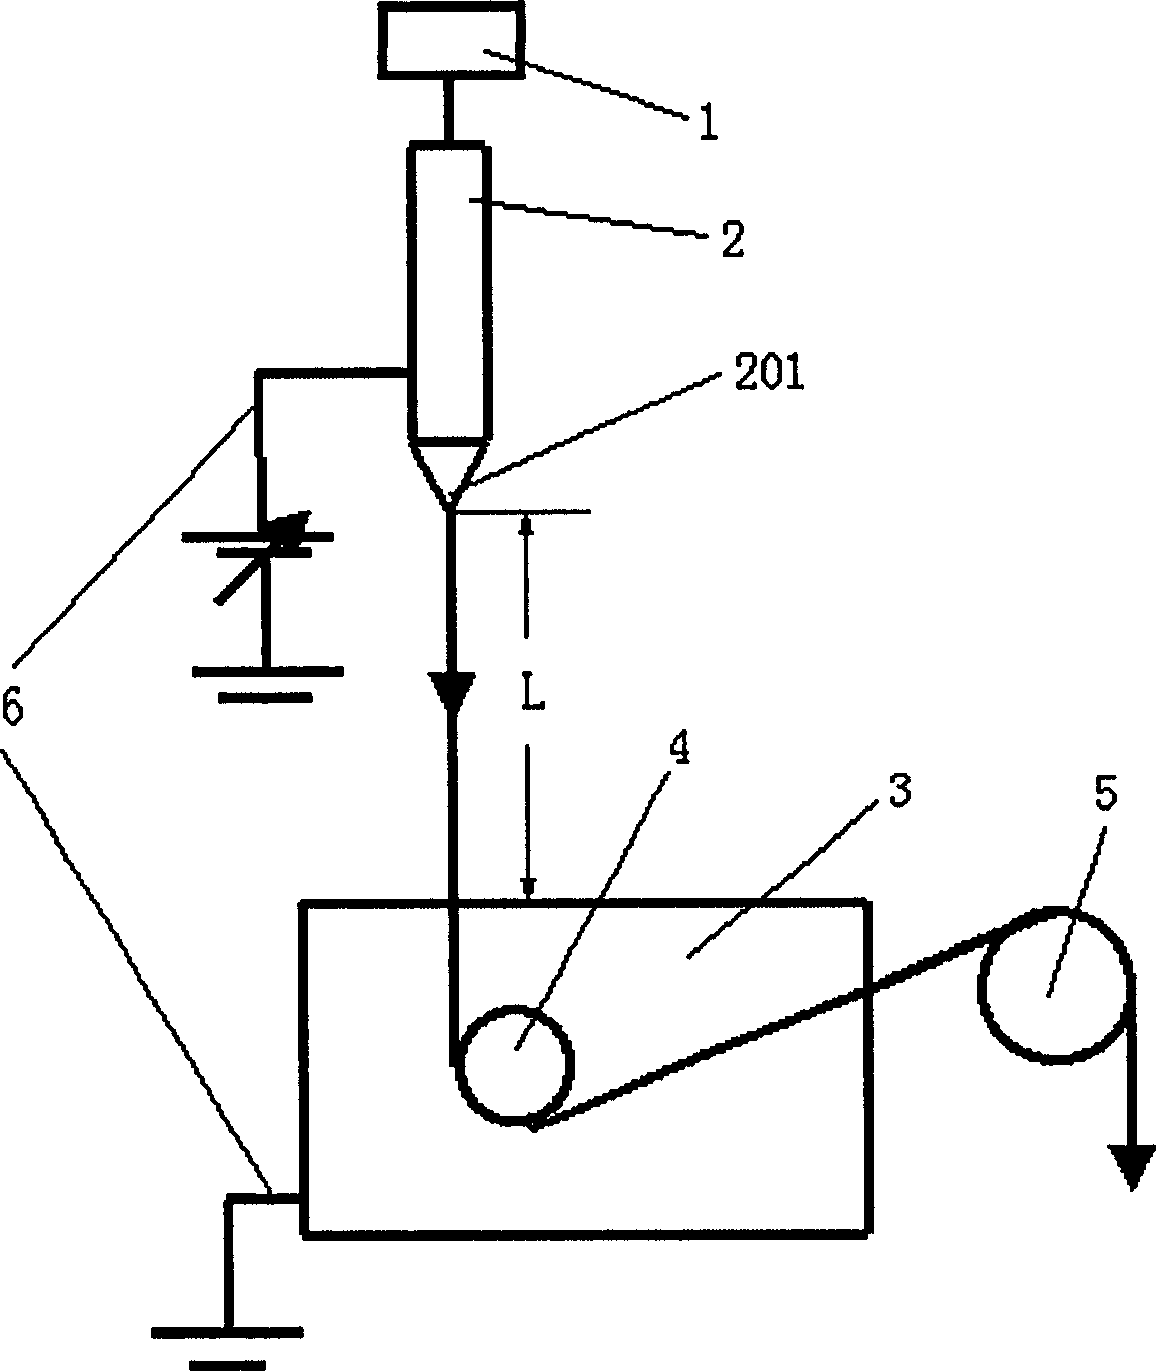 Static spinning device and its industrial use